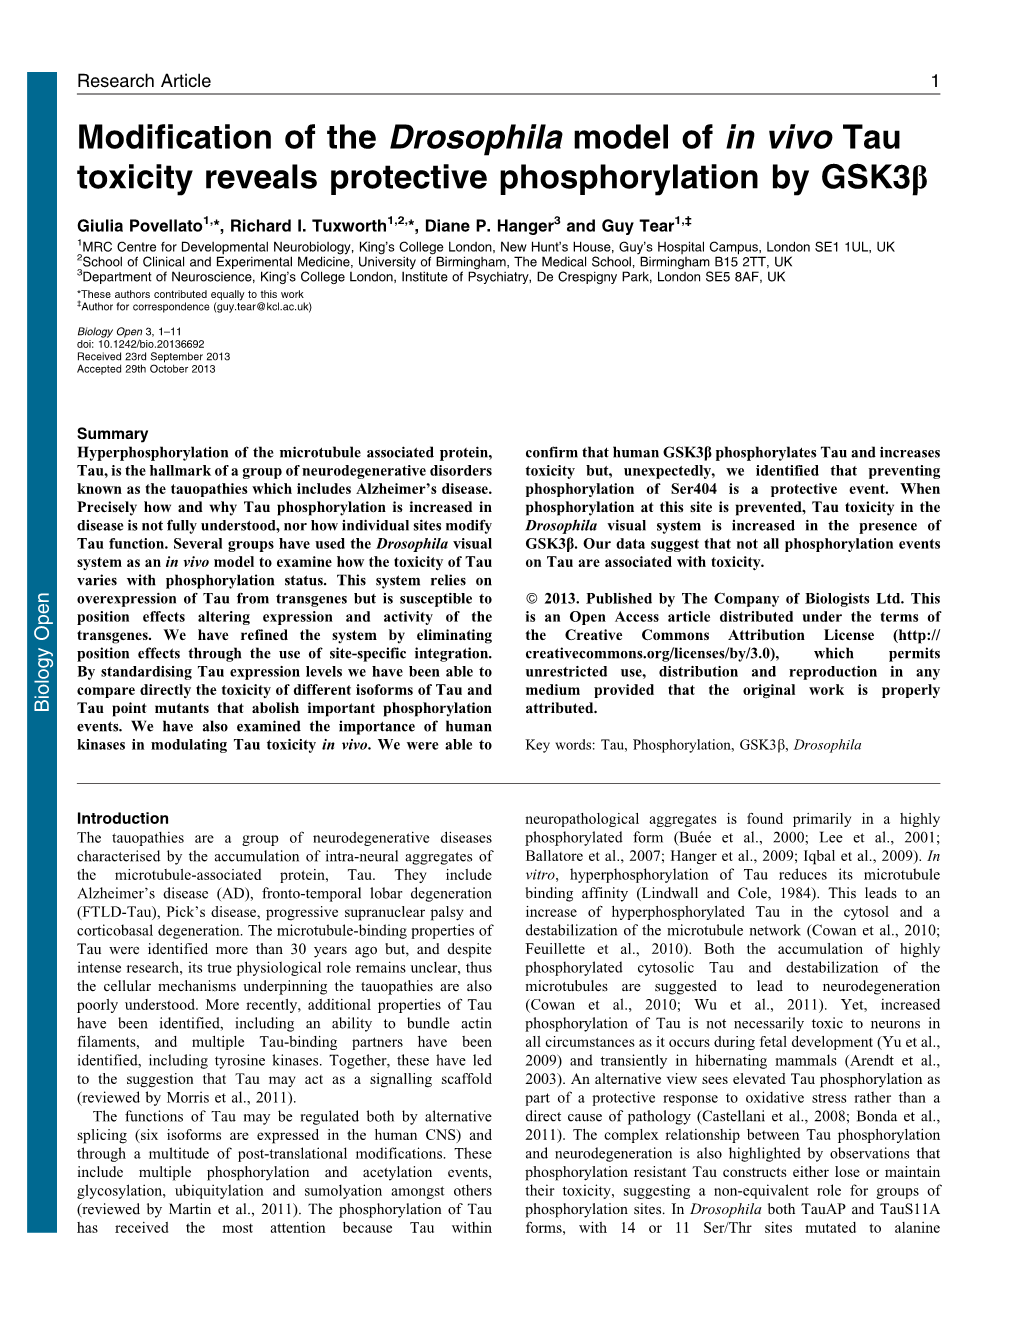 Modification of the Drosophila Model of in Vivo Tau Toxicity Reveals Protective Phosphorylation by Gsk3b